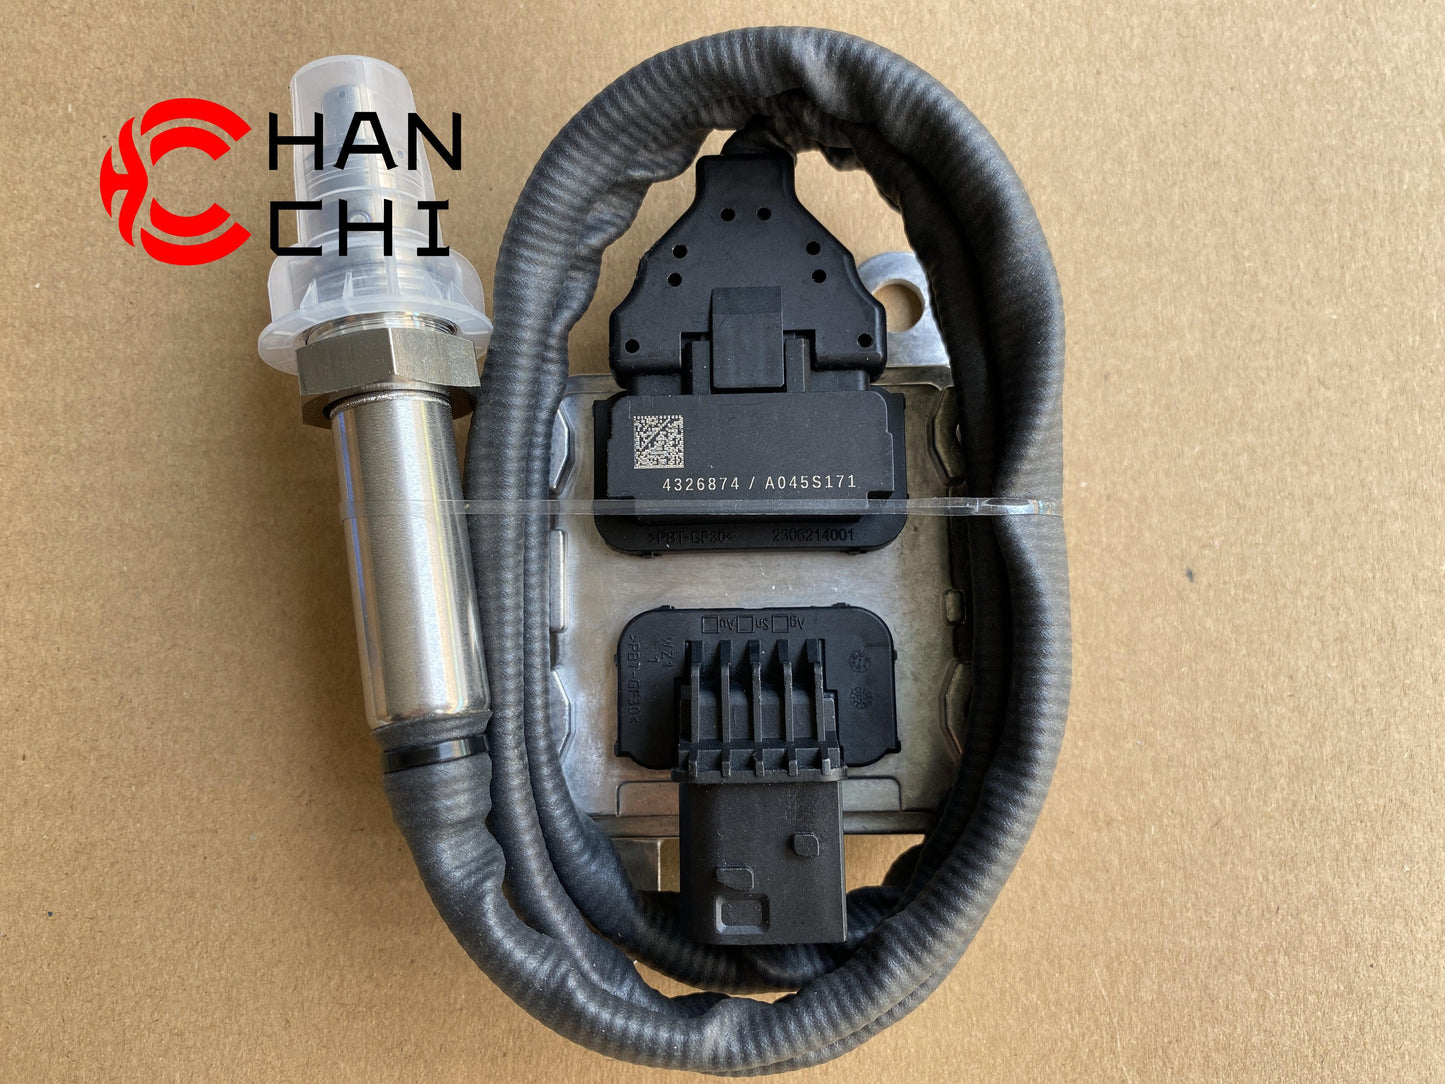 OEM: 5WK96714B 4326874 12VMaterial: ABS metalColor: black silverOrigin: Made in ChinaWeight: 400gPacking List: 1* Nitrogen oxide sensor NOx More ServiceWe can provide OEM Manufacturing serviceWe can Be your one-step solution for Auto PartsWe can provide technical scheme for you Feel Free to Contact Us, We will get back to you as soon as possible.